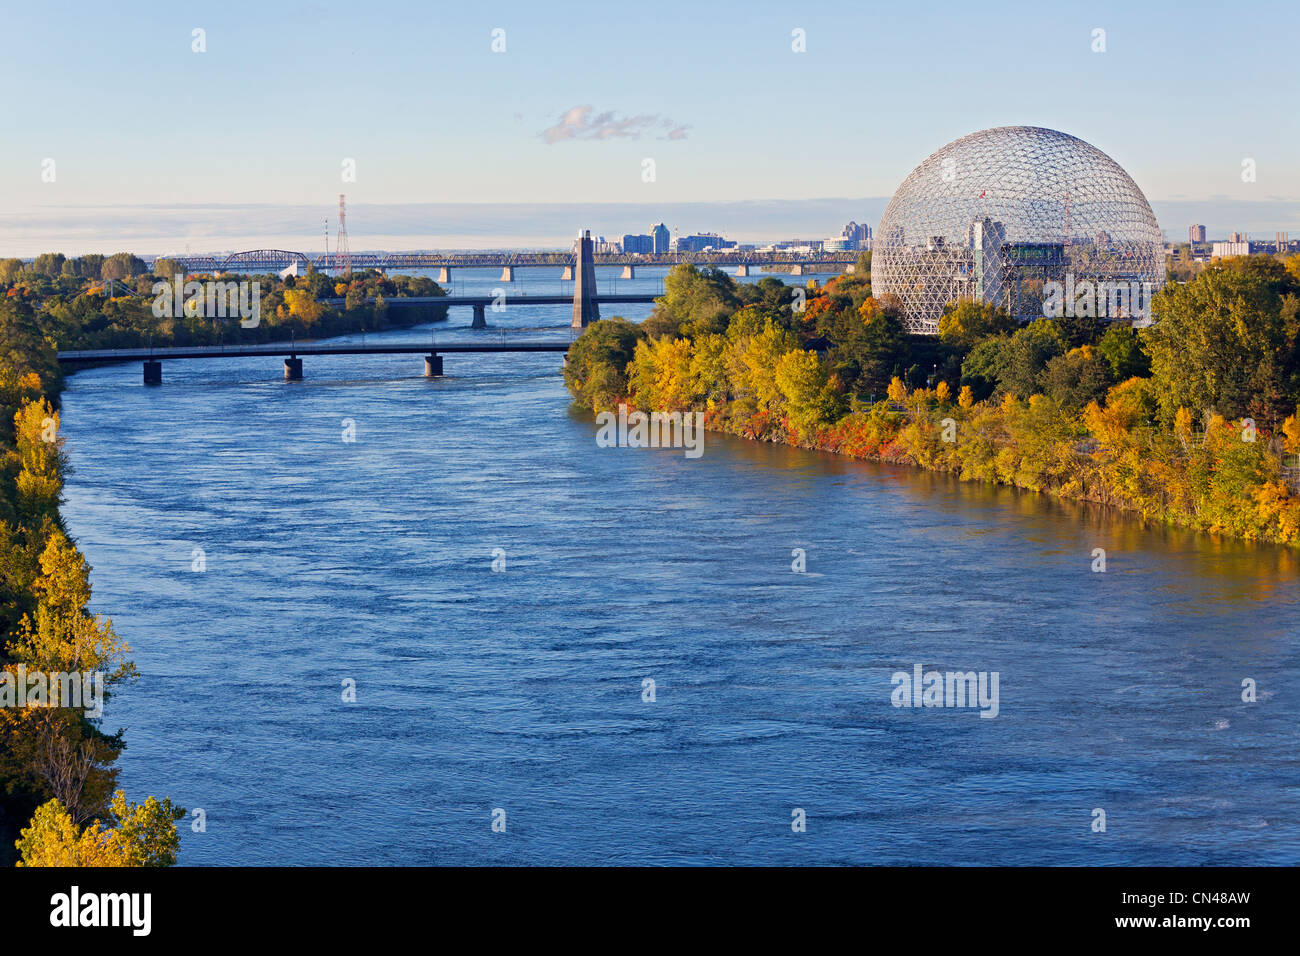 Canada, Quebec Province, Montreal, Ile Sainte Helene and the St. Lawrence River, the Biosphere and vegetation in the Autumn Stock Photo